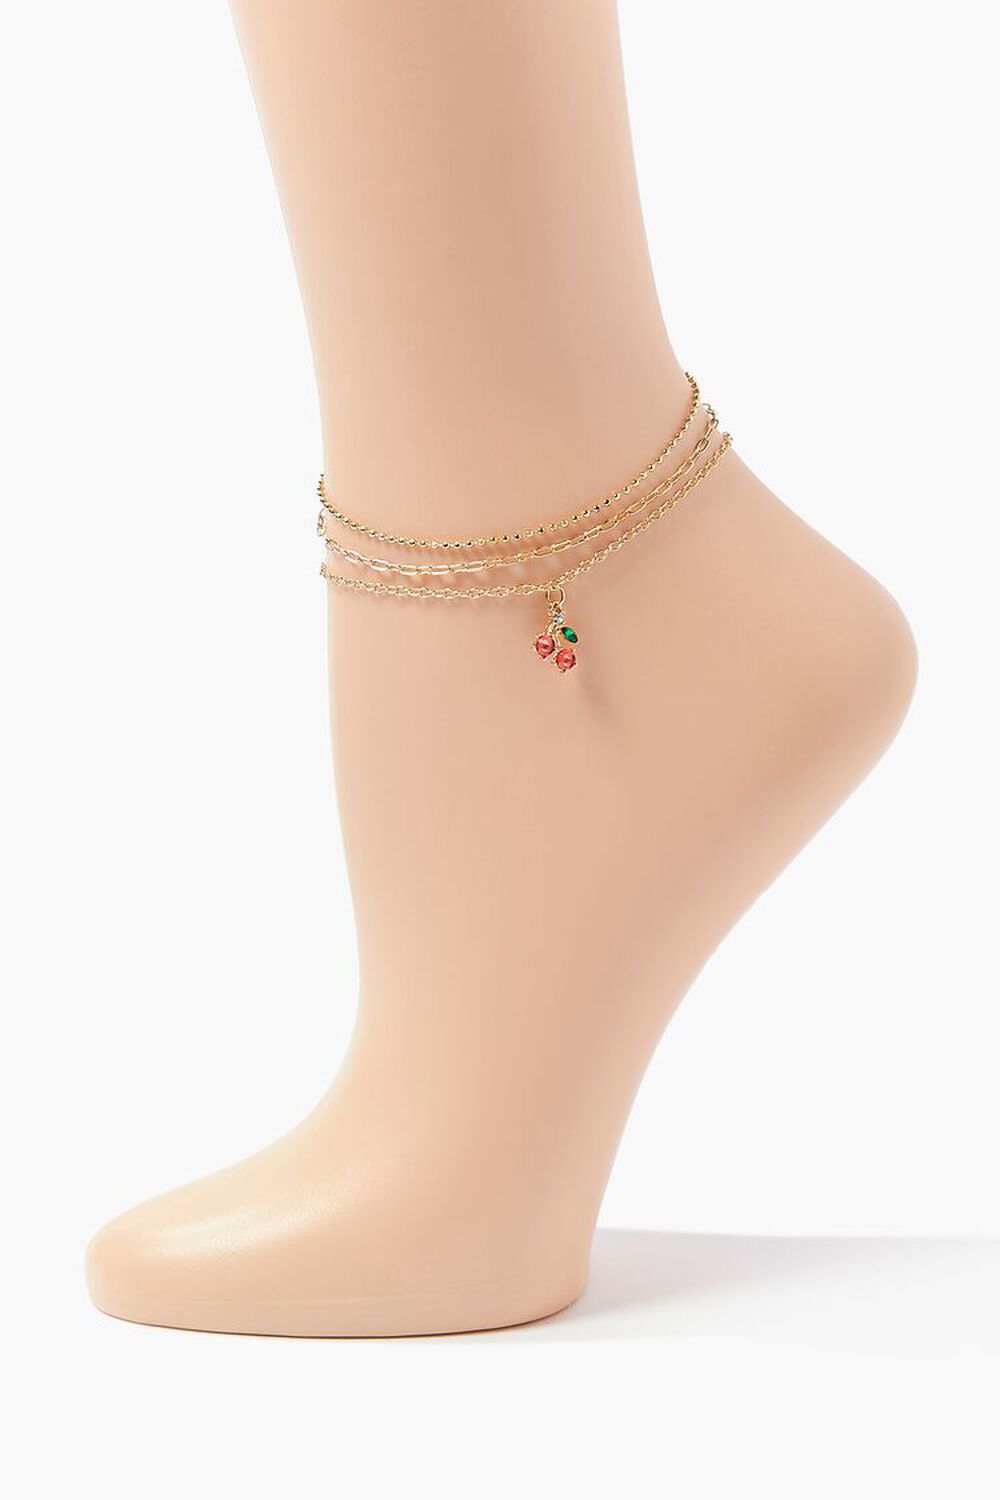 GOLD/RED Upcycled Cherry Charm Anklet Set, image 1